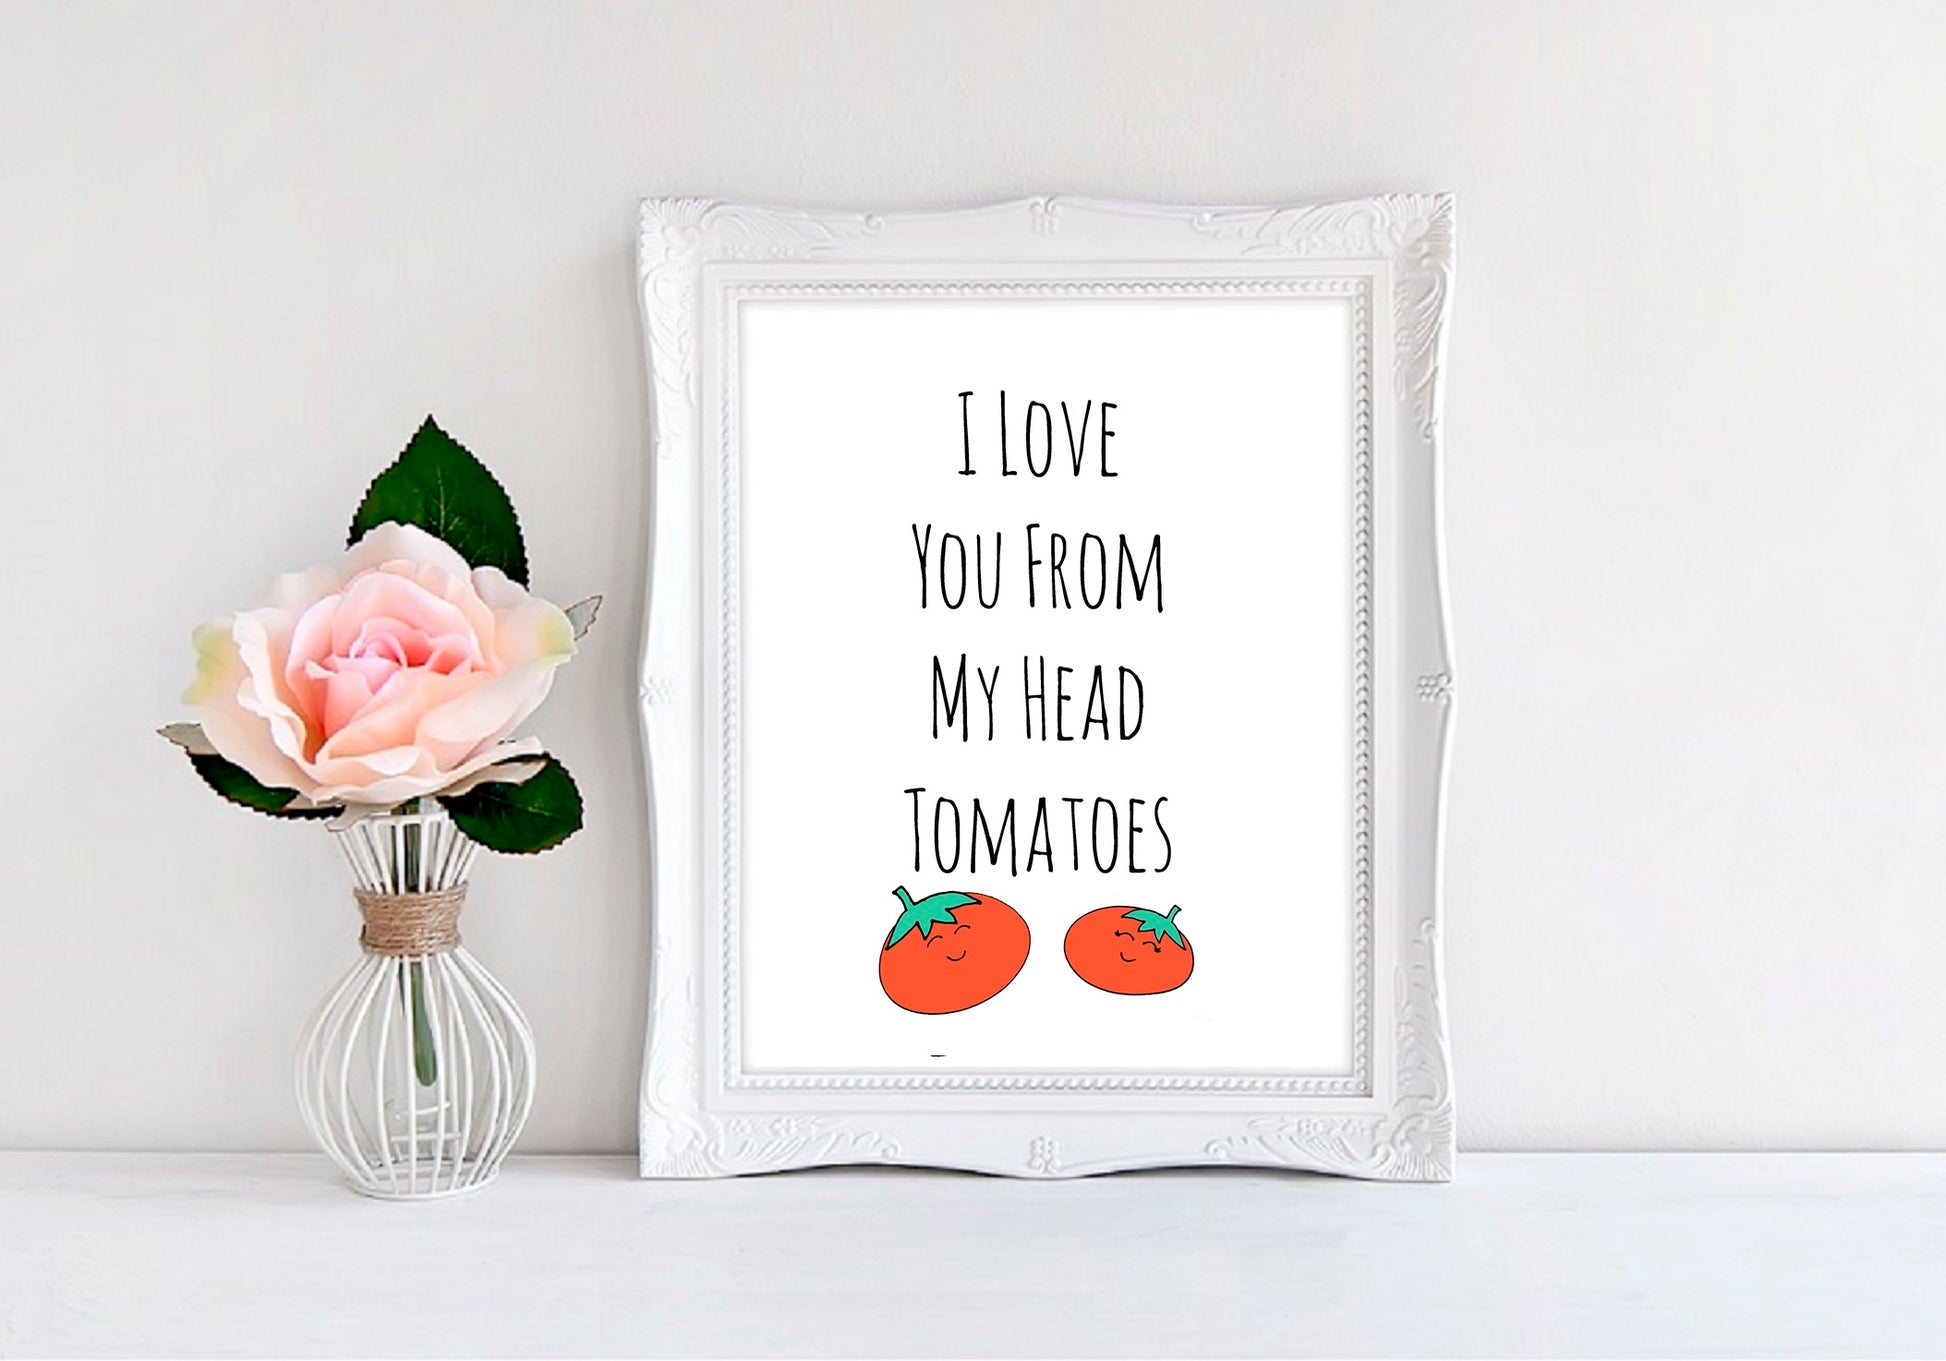 I Love You From My Head Tomatoes - 8"x10" Wall Print - MoonlightMakers